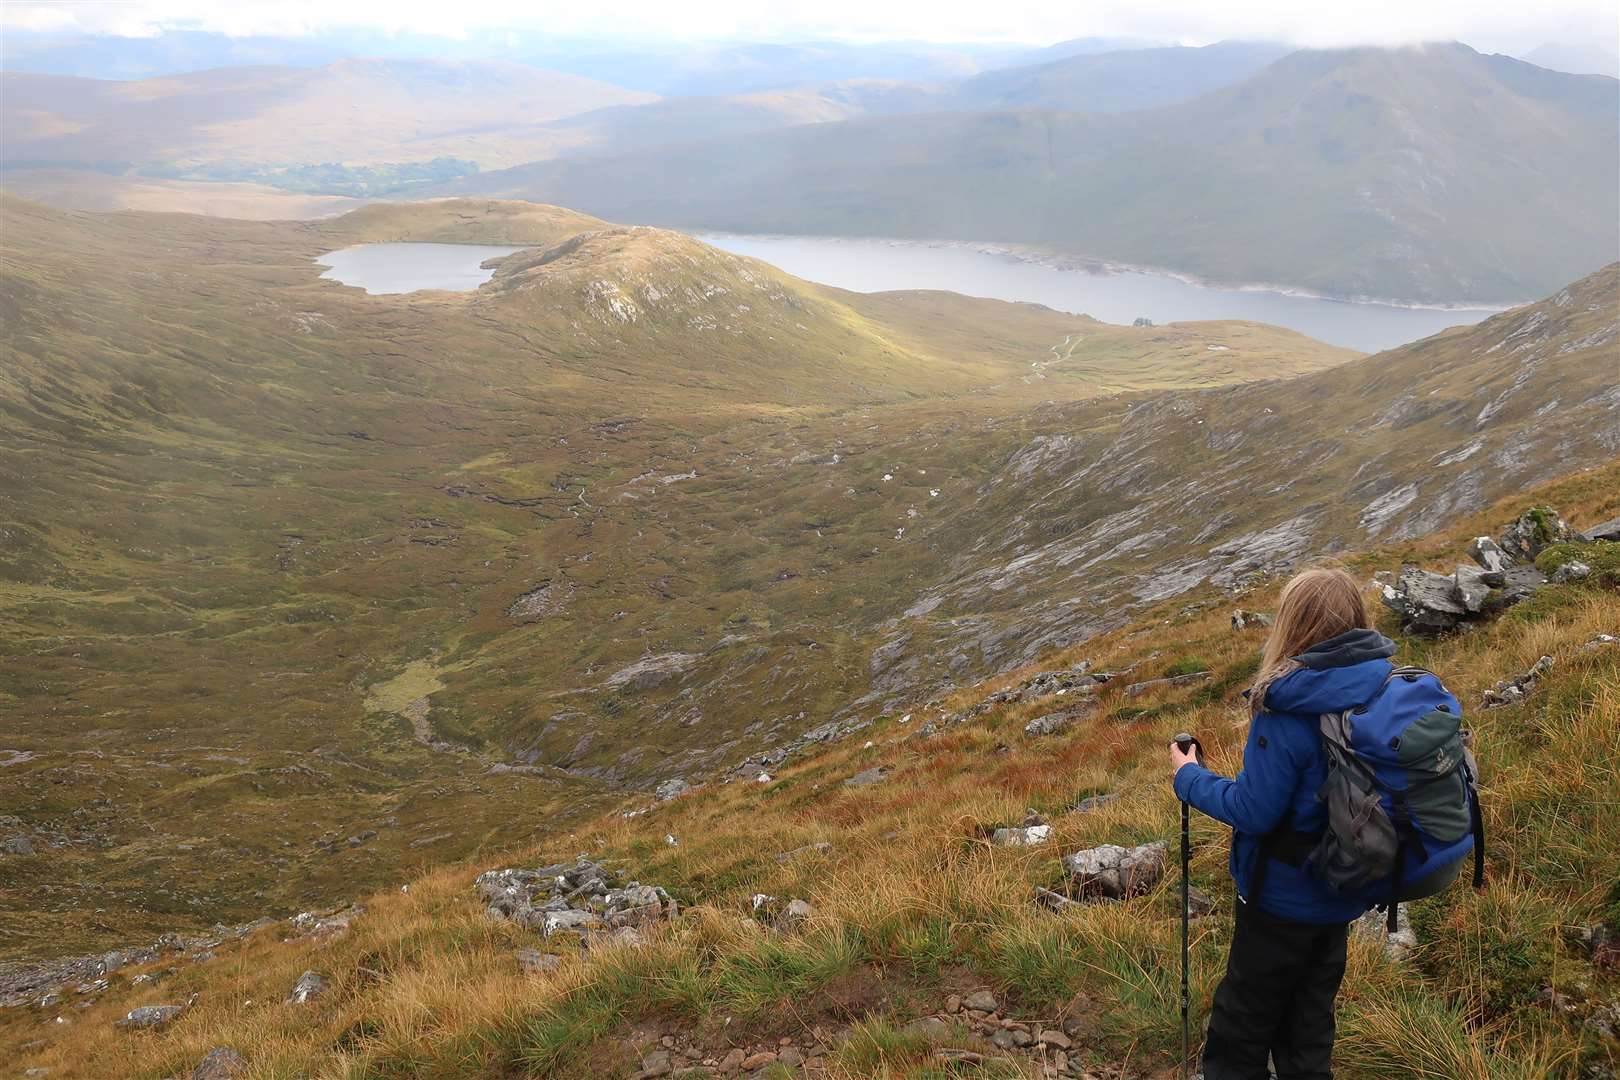 Admiring the view over Loch Fearna and Loch Cuaich from the Fiar Bhealach.